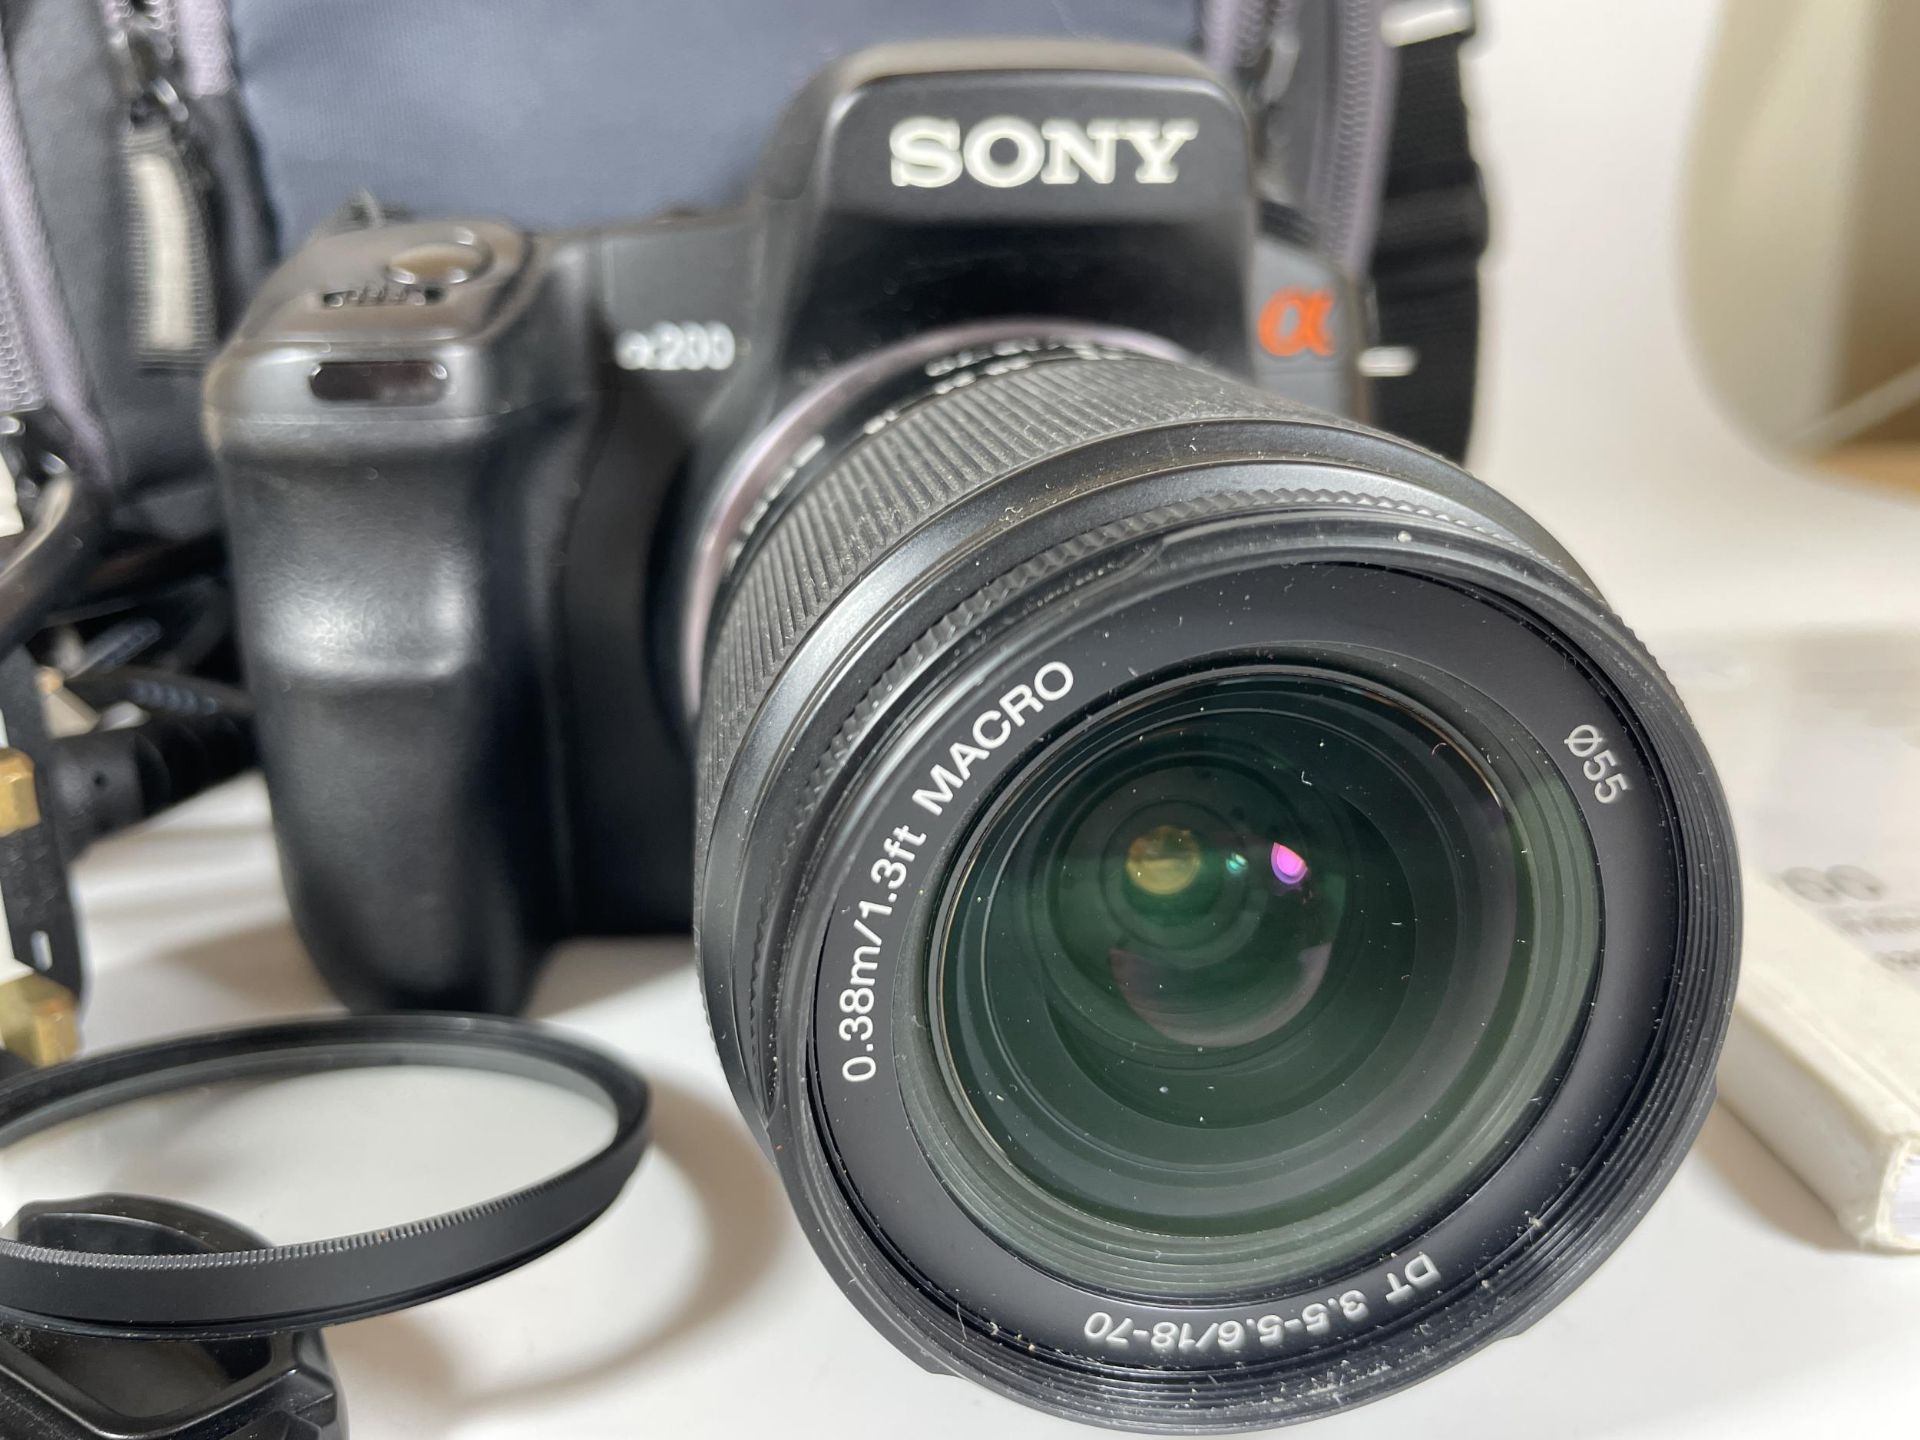 A SONY A200 DIGITAL SLR CAMERA WITH 0.38M/1.3FT MACRO LENS, CHARGER, MANUAL & CASE - Image 2 of 4